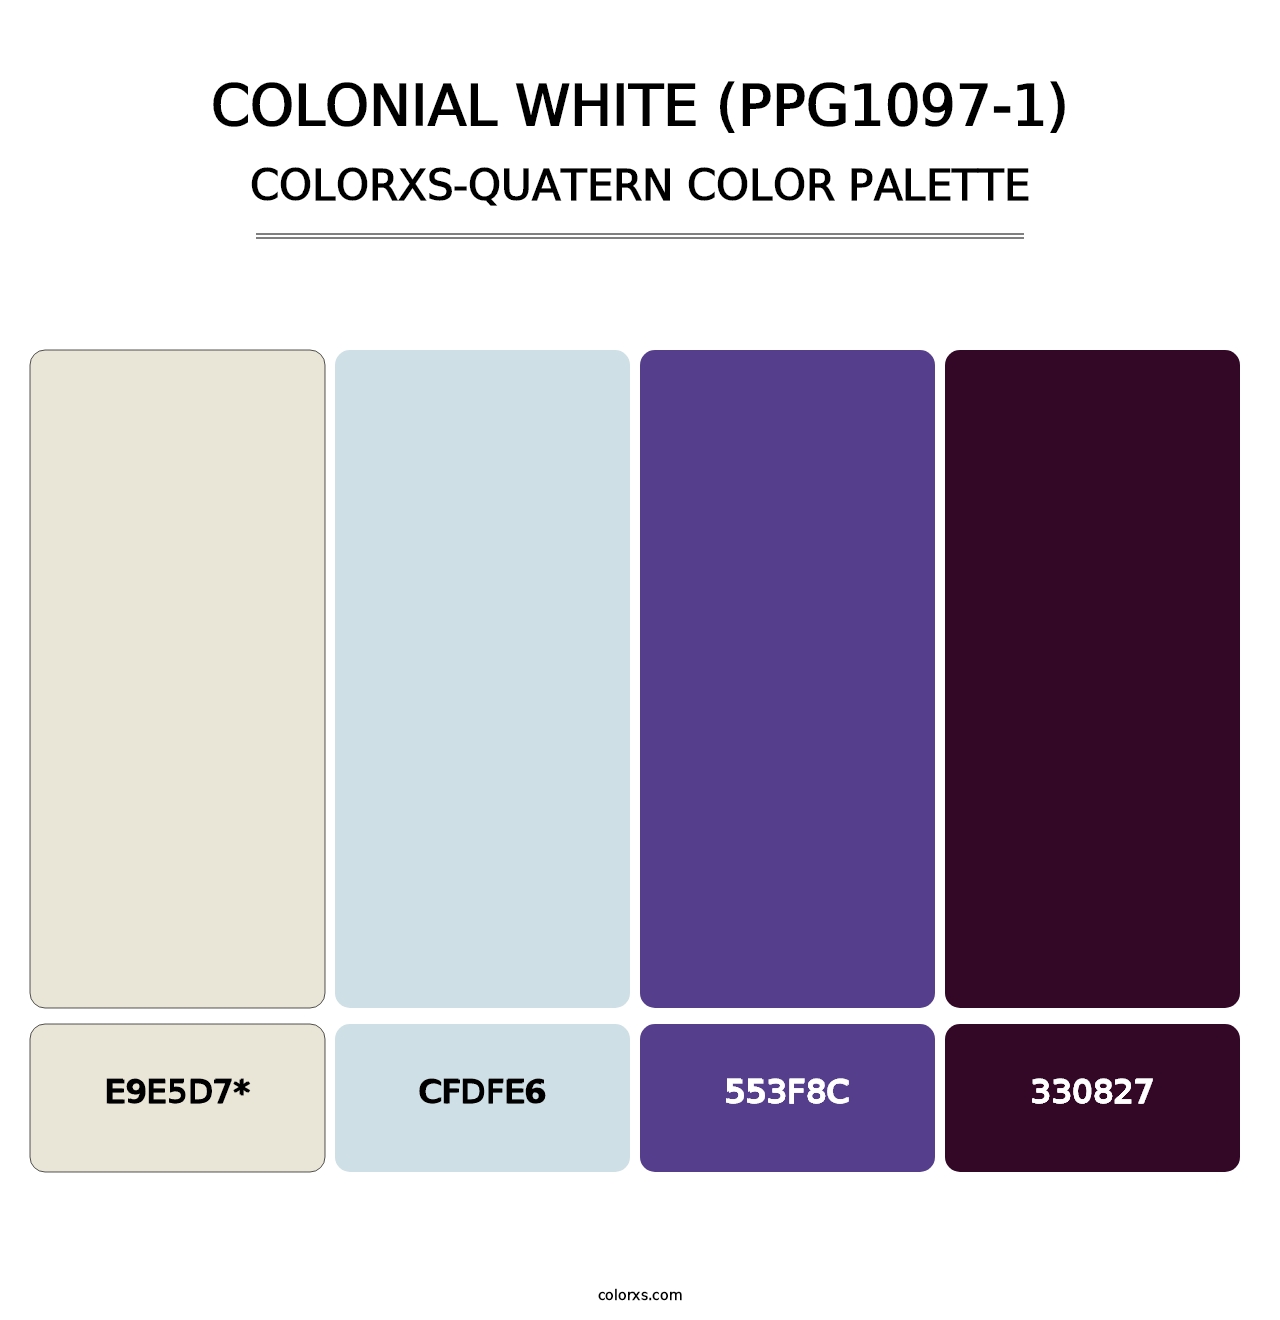 Colonial White (PPG1097-1) - Colorxs Quatern Palette